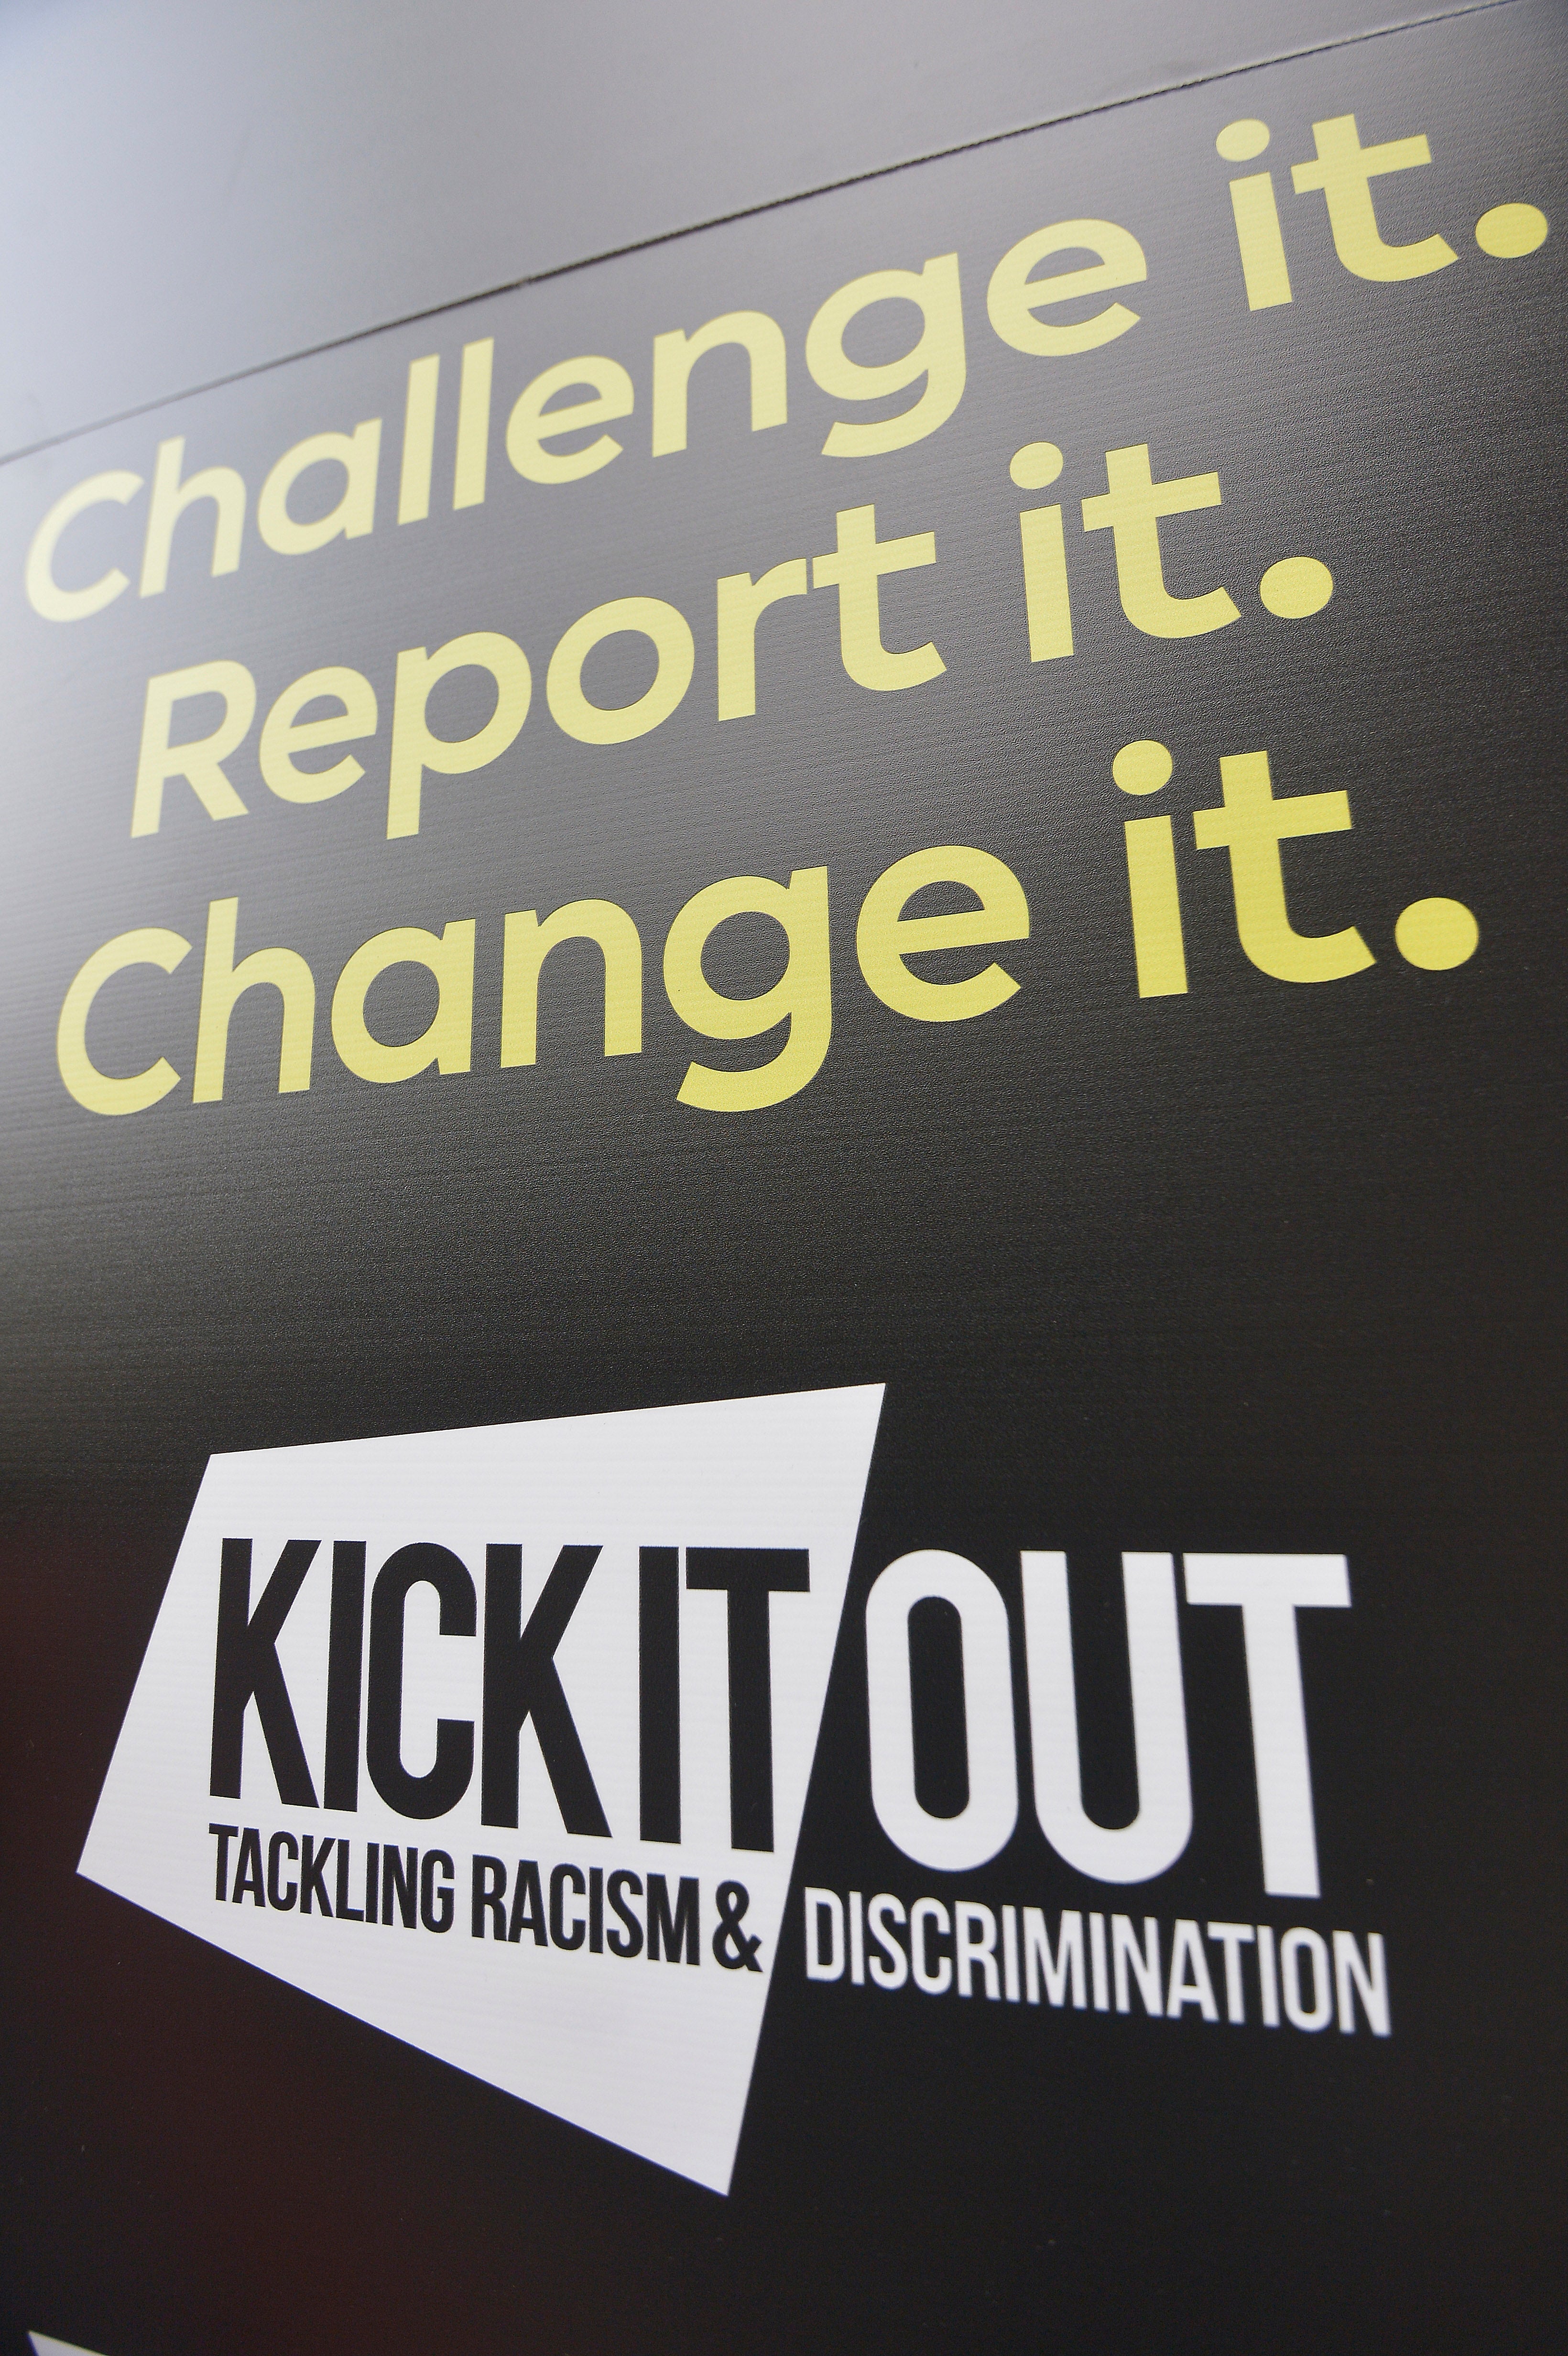 Kick It Out hopes to make it easier to report discrimination at games and online